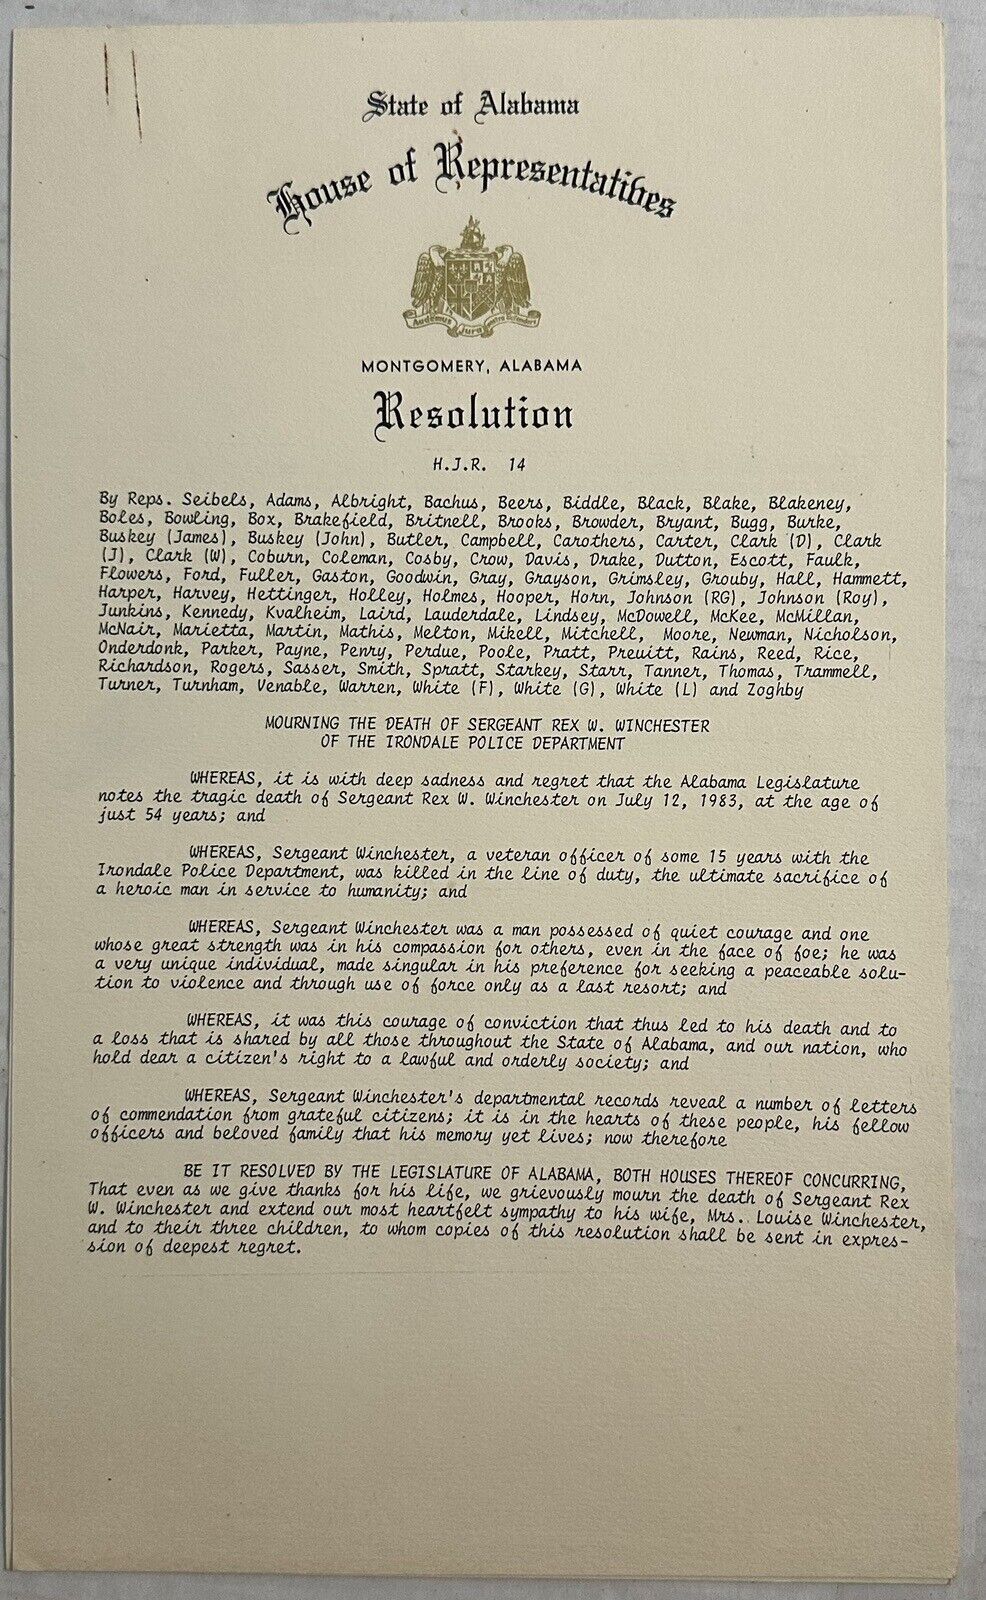 1983 George Wallace Signed Resolution 14 Alabama - Death of Officer Winchester